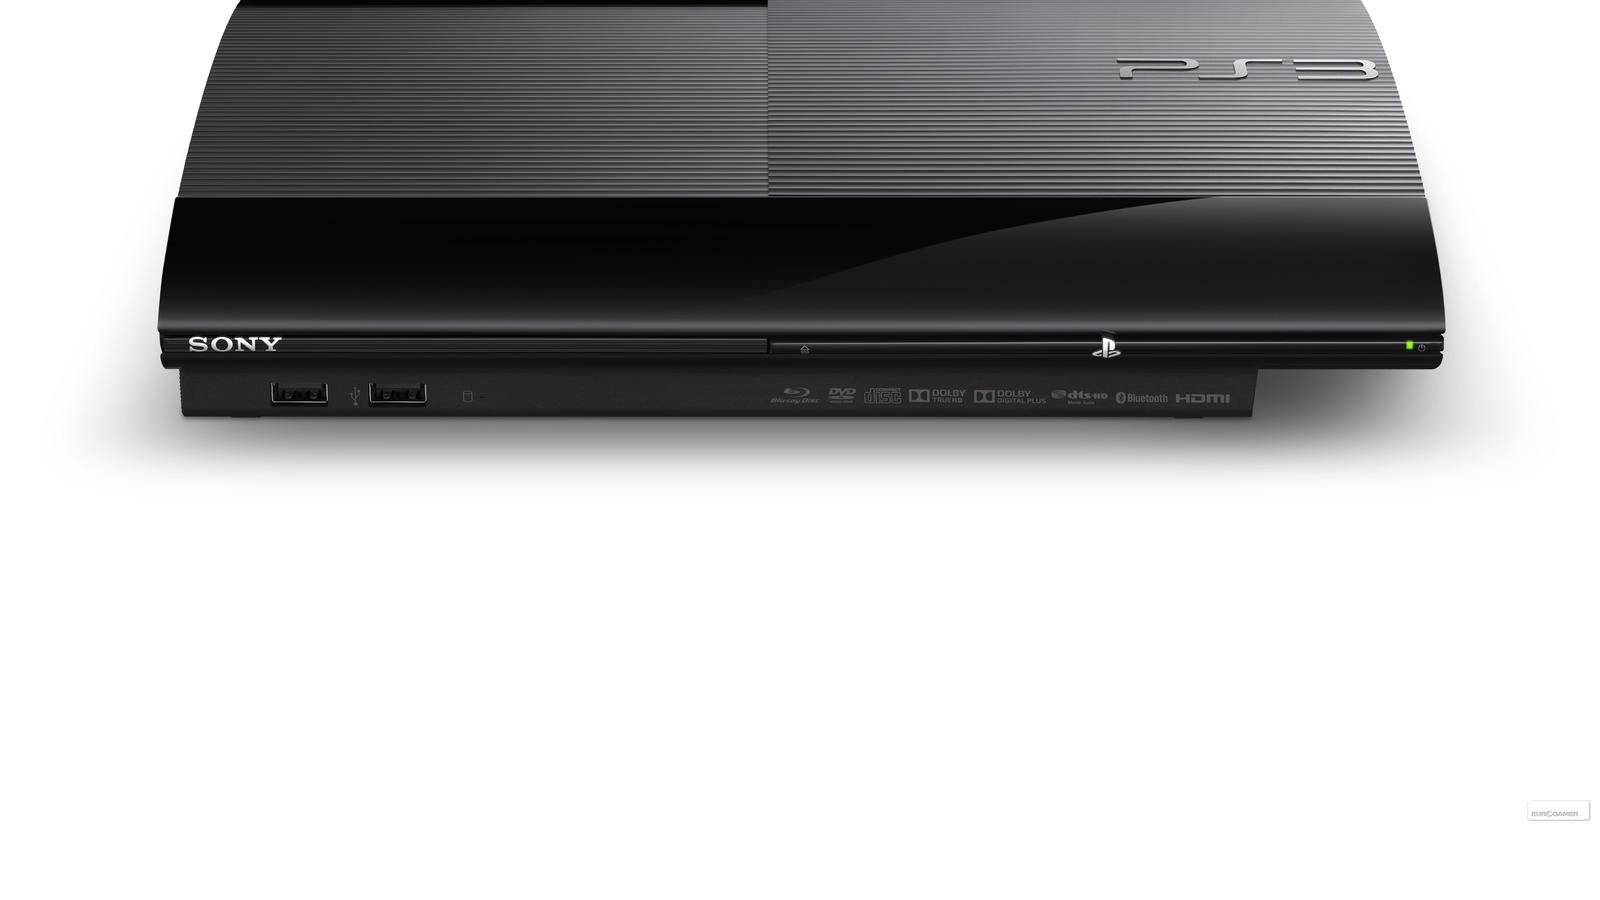 Labe Nationaal Ale PlayStation 3 12GB Super Slim review | Eurogamer.net